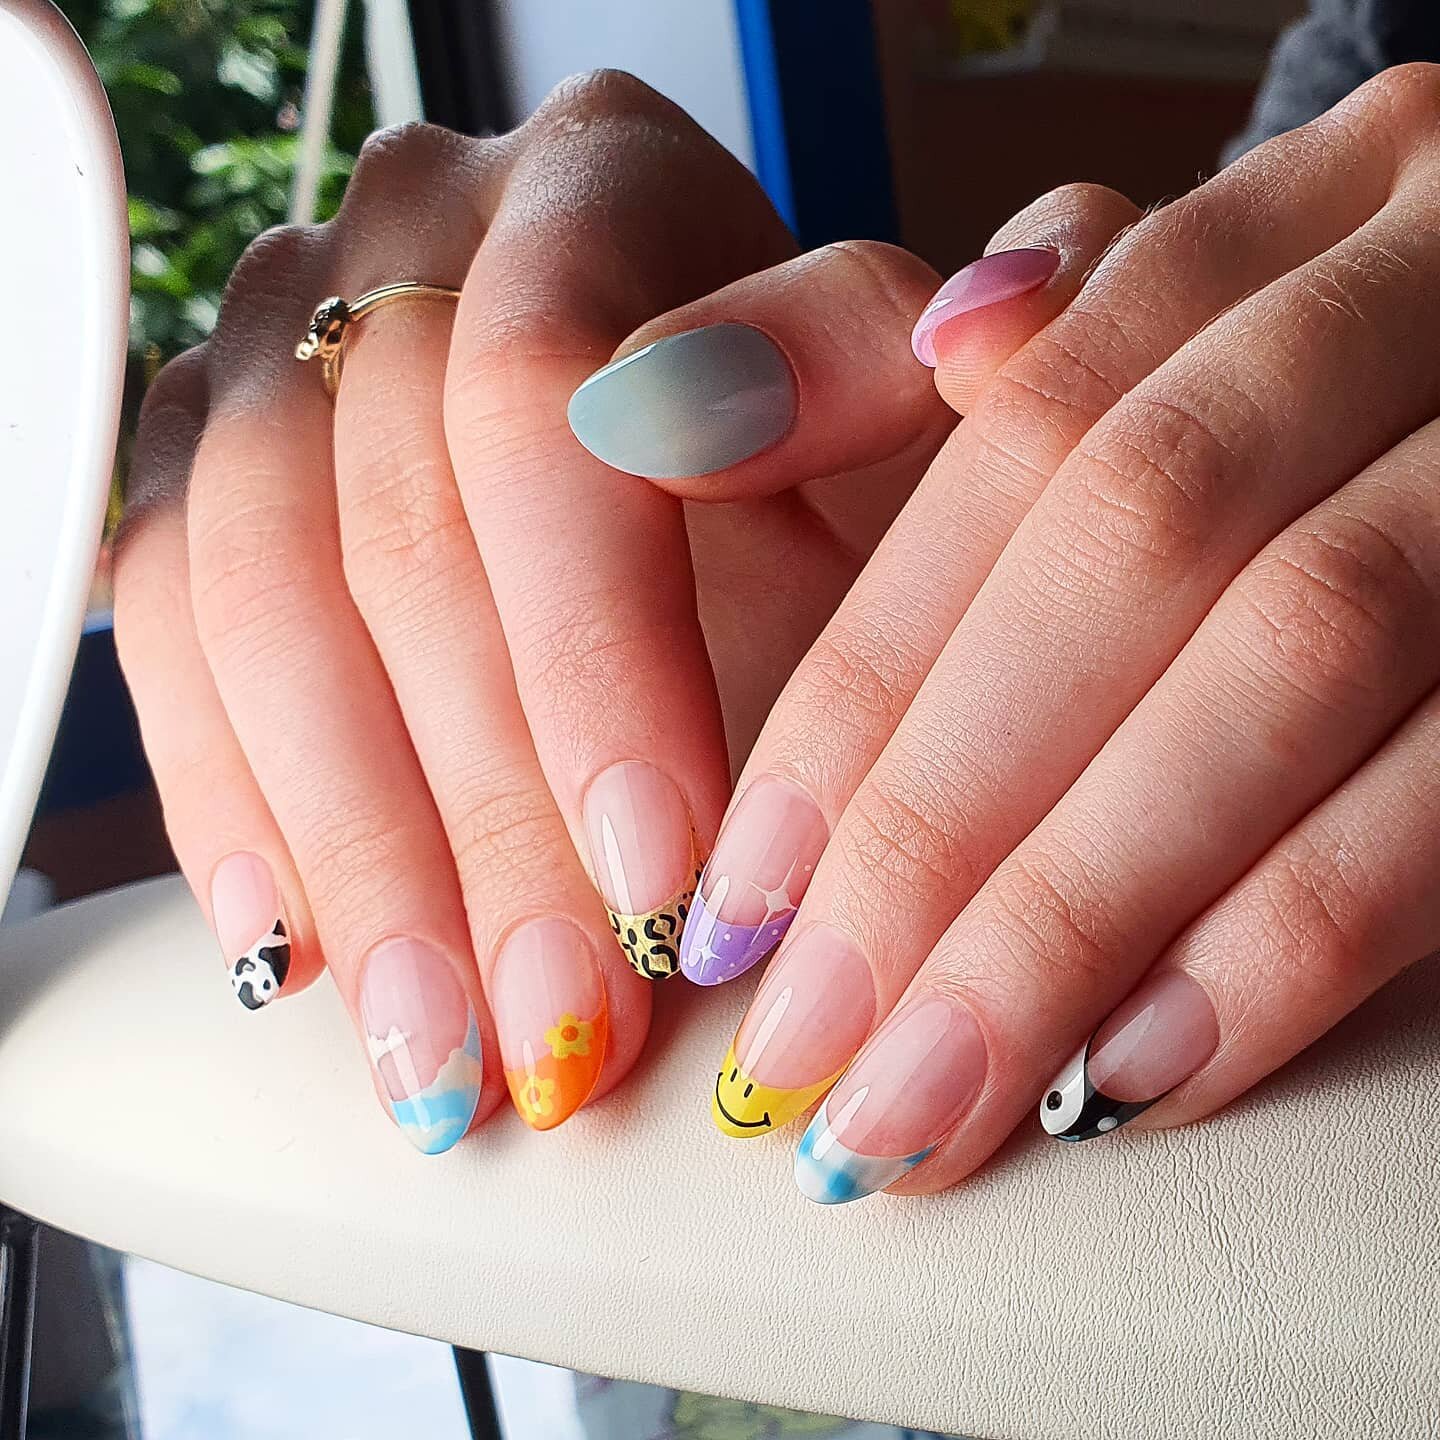 Pick&rsquo;n&rsquo;mix french tips! 🙂🌼☁️ Book:⁣ Gel Extensions⁣⁣ ⁣⁣⁣⁣⁣⁣⁣+ 20 minute art⁣⁣
⁣⁣⁣
⁣
[Inspo via @nails.bab] But also check out @sassnailartistry who posted her own pick&rsquo;n&rsquo;mix today too!⁣
⁣⁣
⁣⁣⁣⁣⁣⁣⁣⁣⁣⁣⁣⁣⁣⁣⁣⁣⁣
⁣
@apresnailoffic